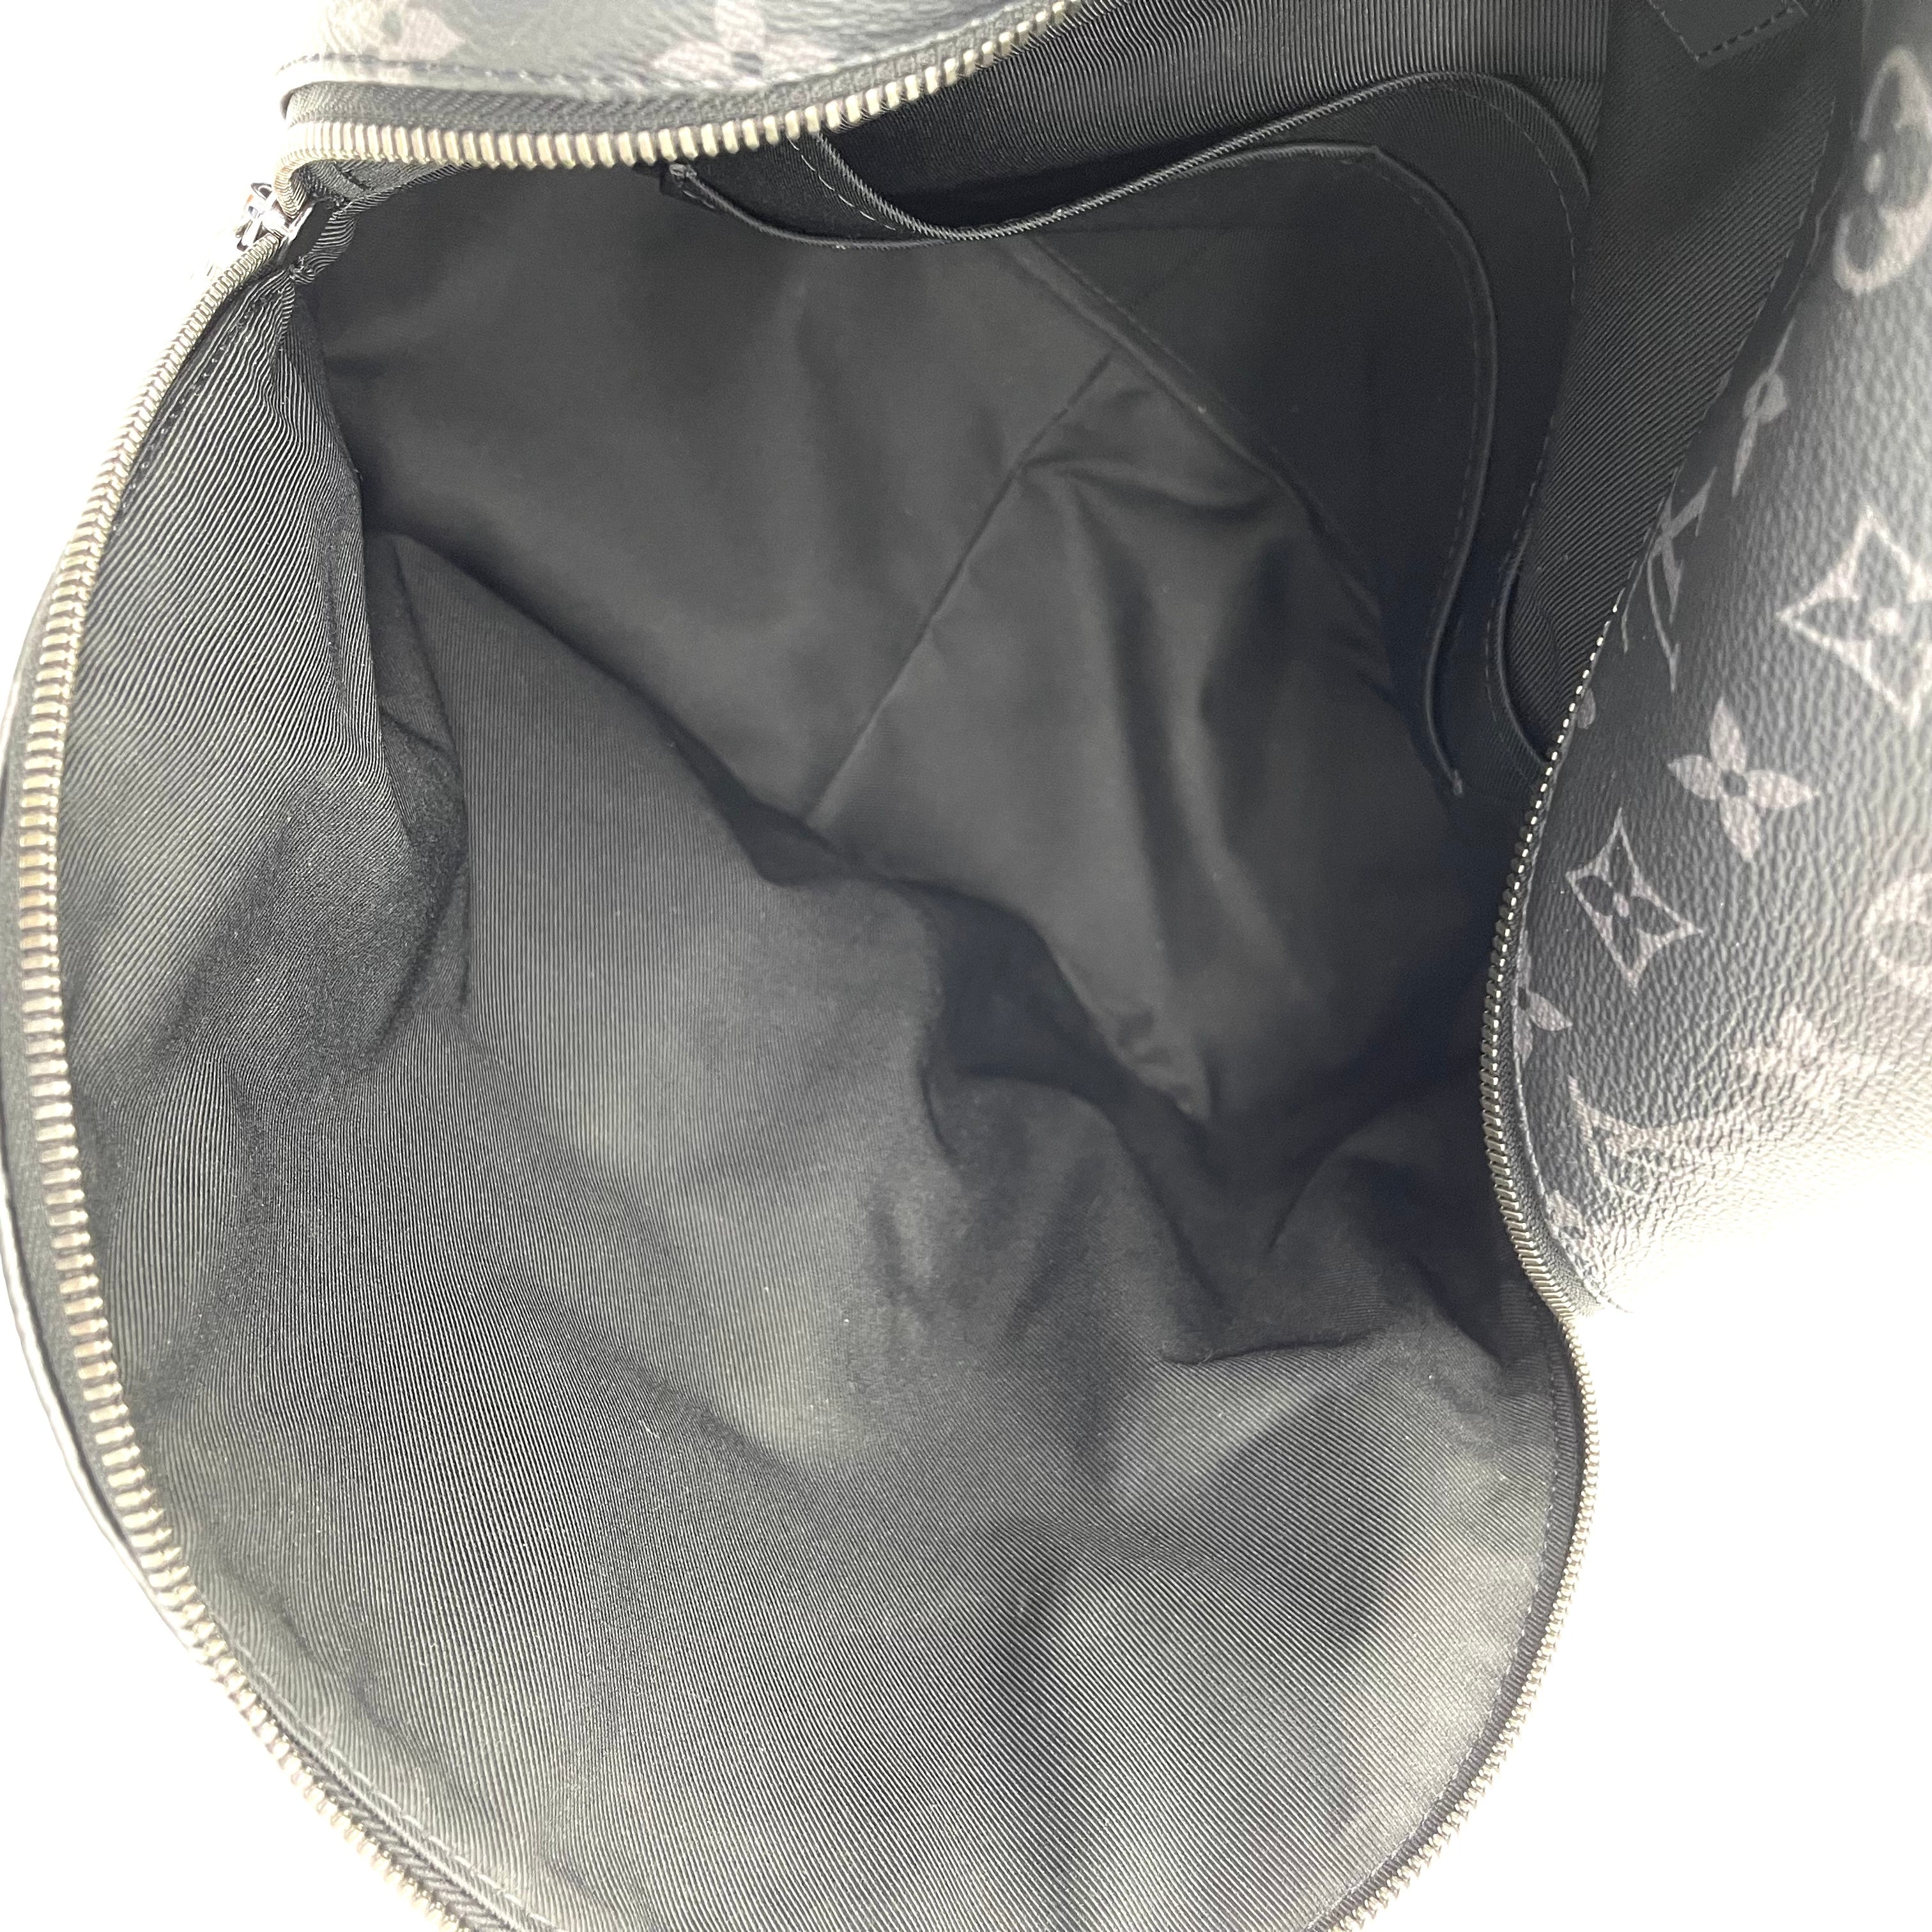 Louis Vuitton - Discovery Backpack Black Monogram Eclipse Canvas